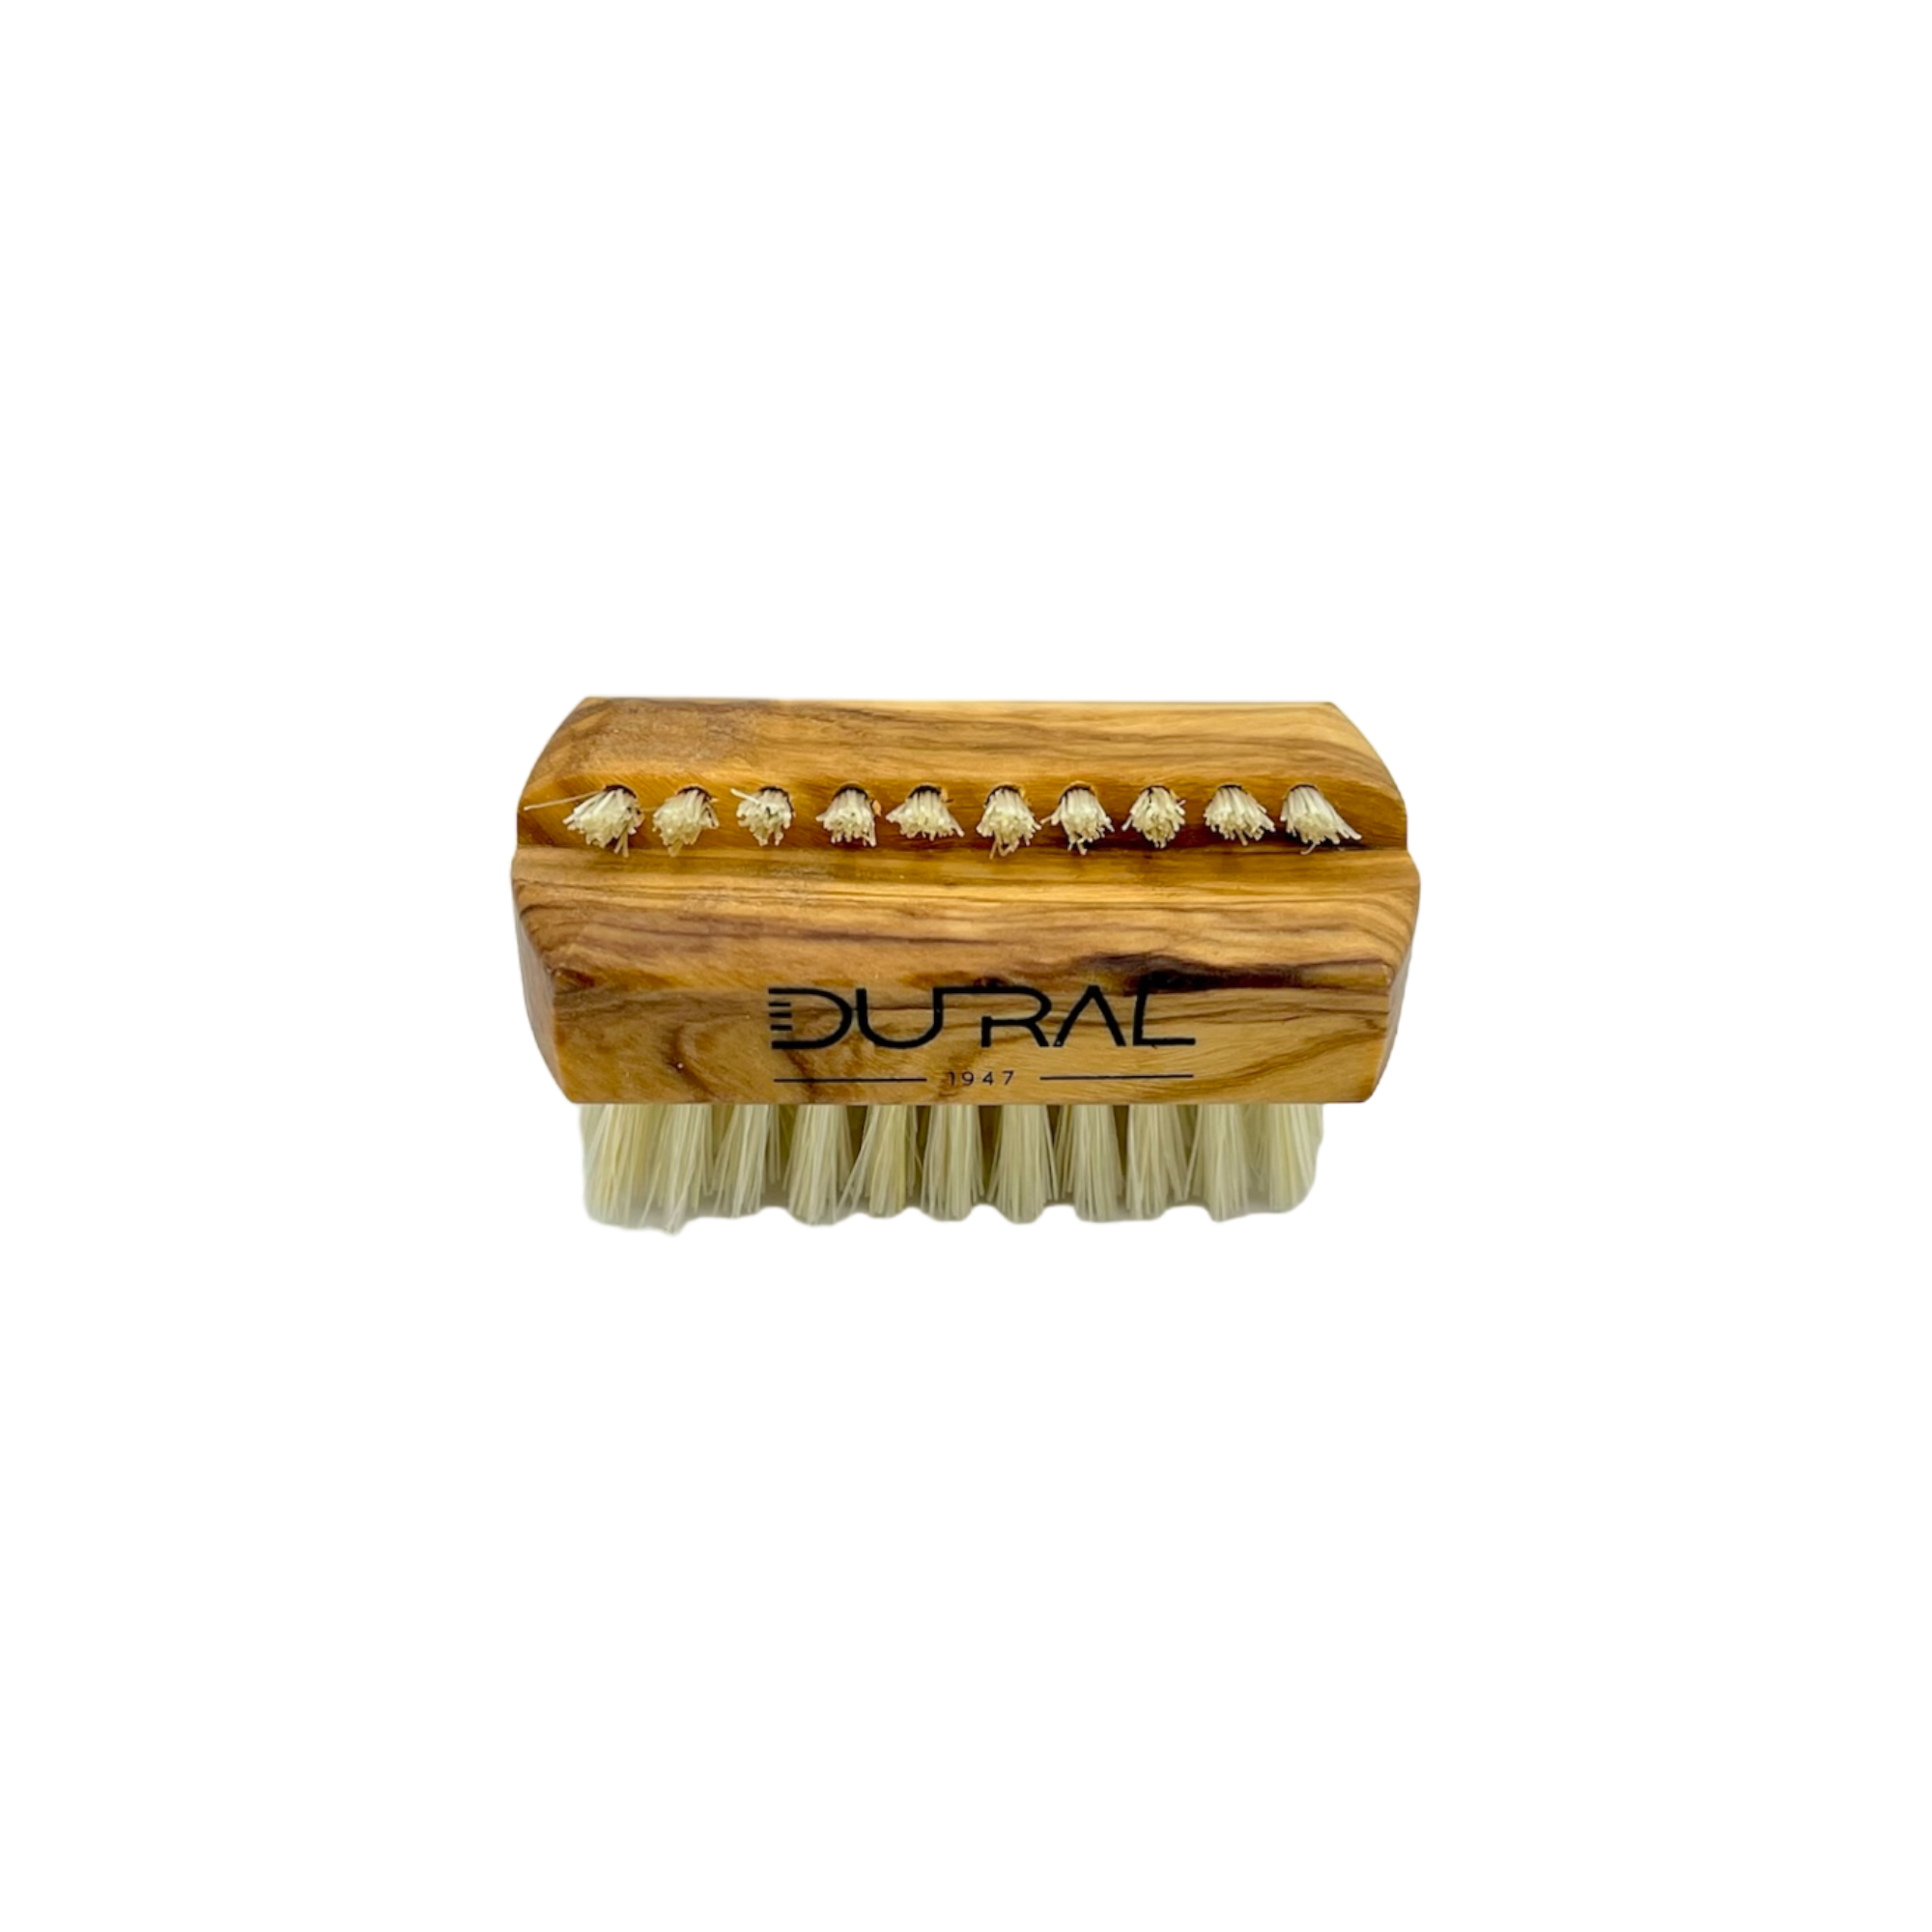 Dural Olive wood travel size nail brush with light natural bristles